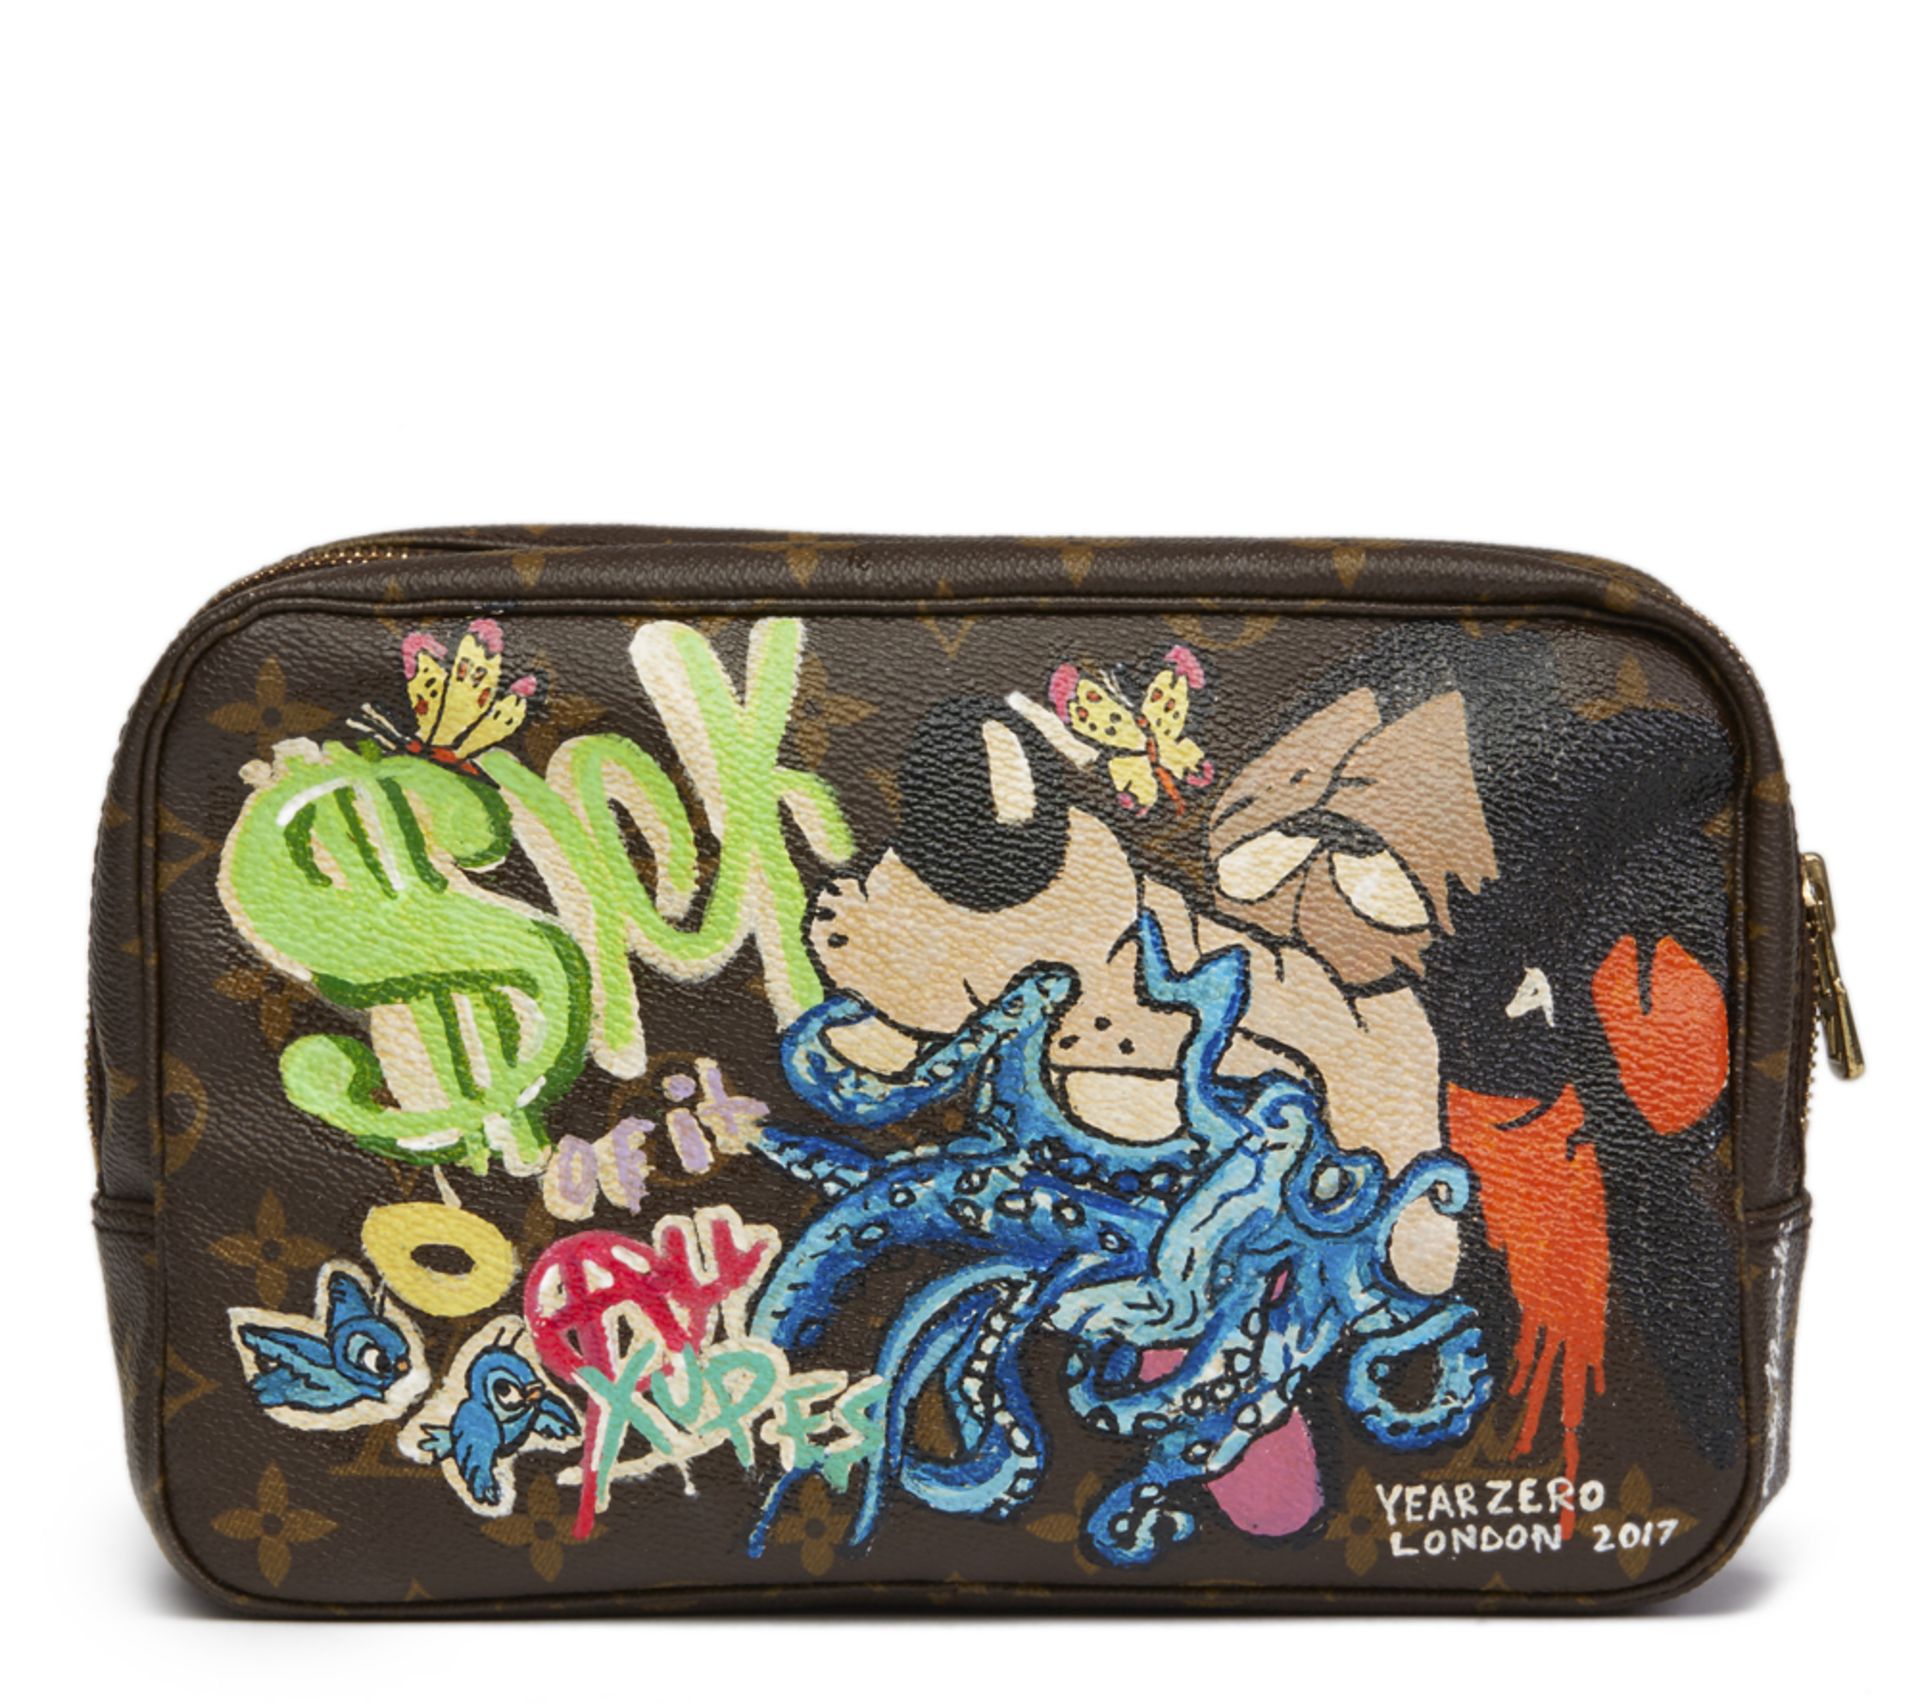 Louis Vuitton Hand-painted 'Sick of it all' X Year Zero London Toiletry Pouch